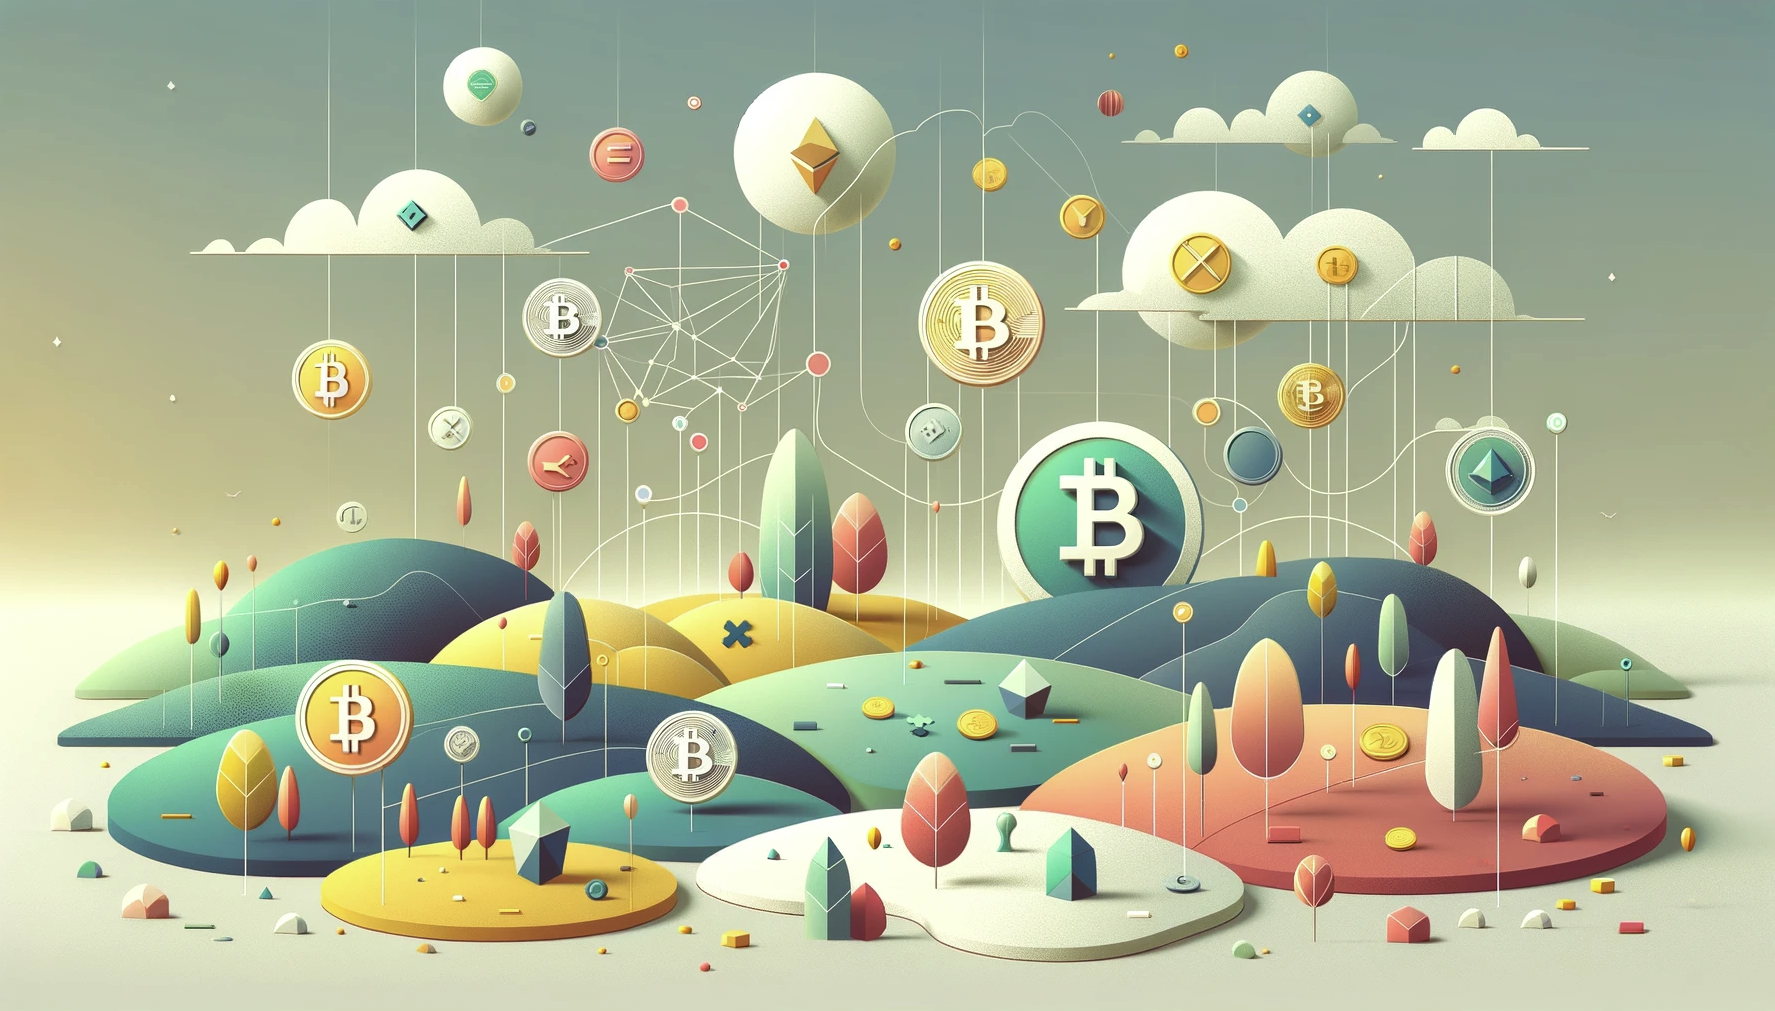 Showing crypto token logos in the Web3 space - graphic art illustration